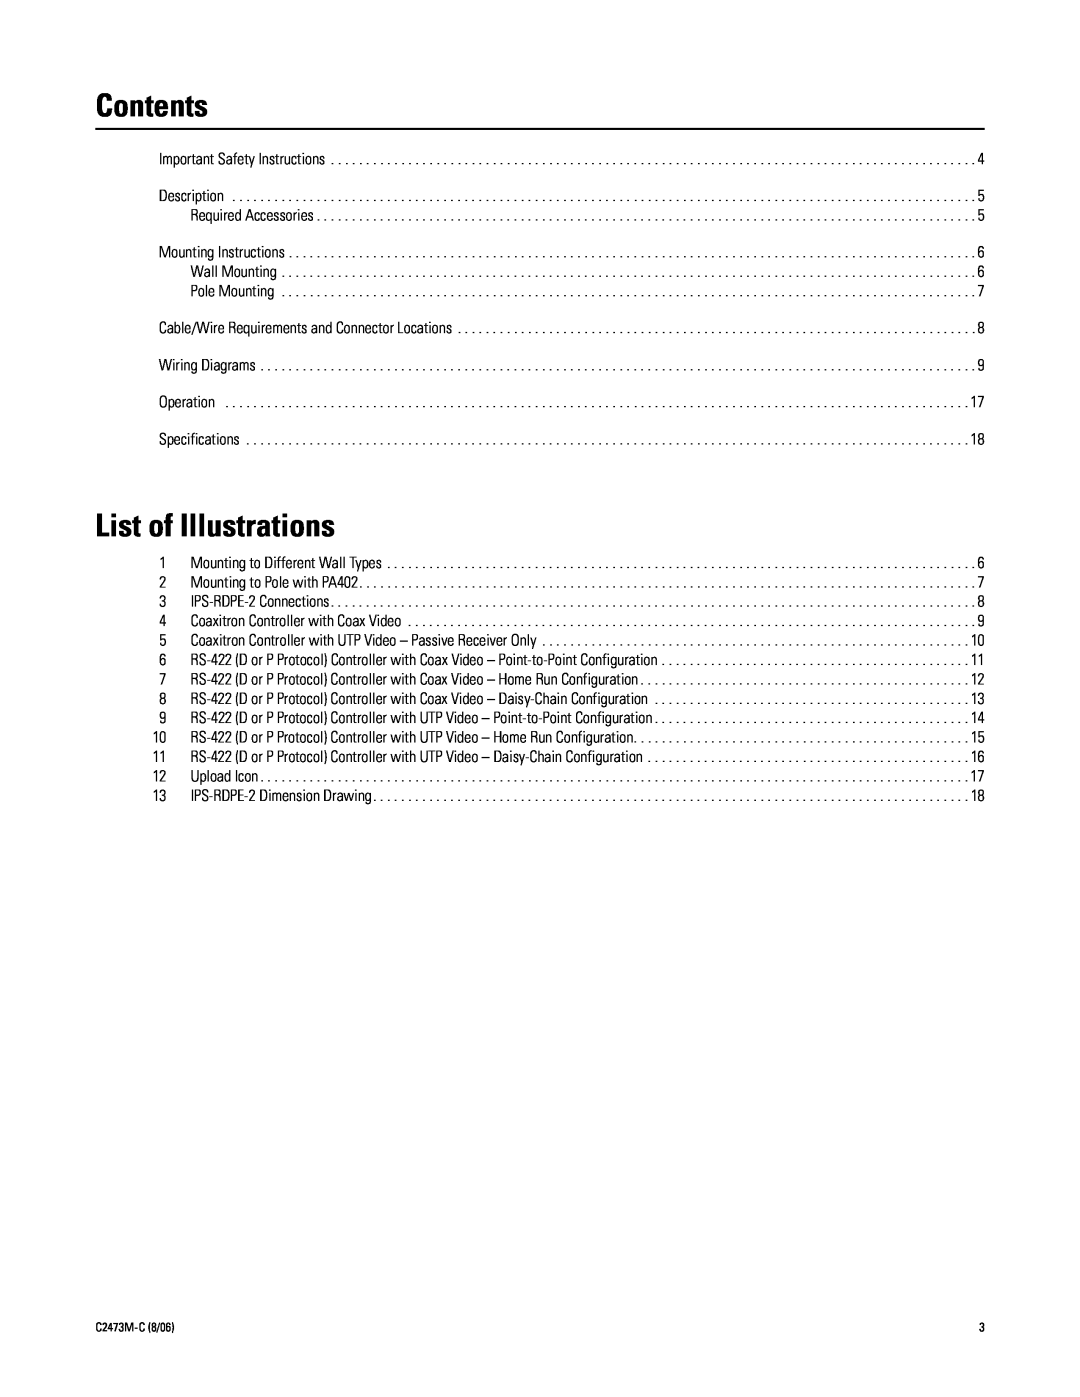 Pelco ips-rdpe-2 manual Contents, List of Illustrations 